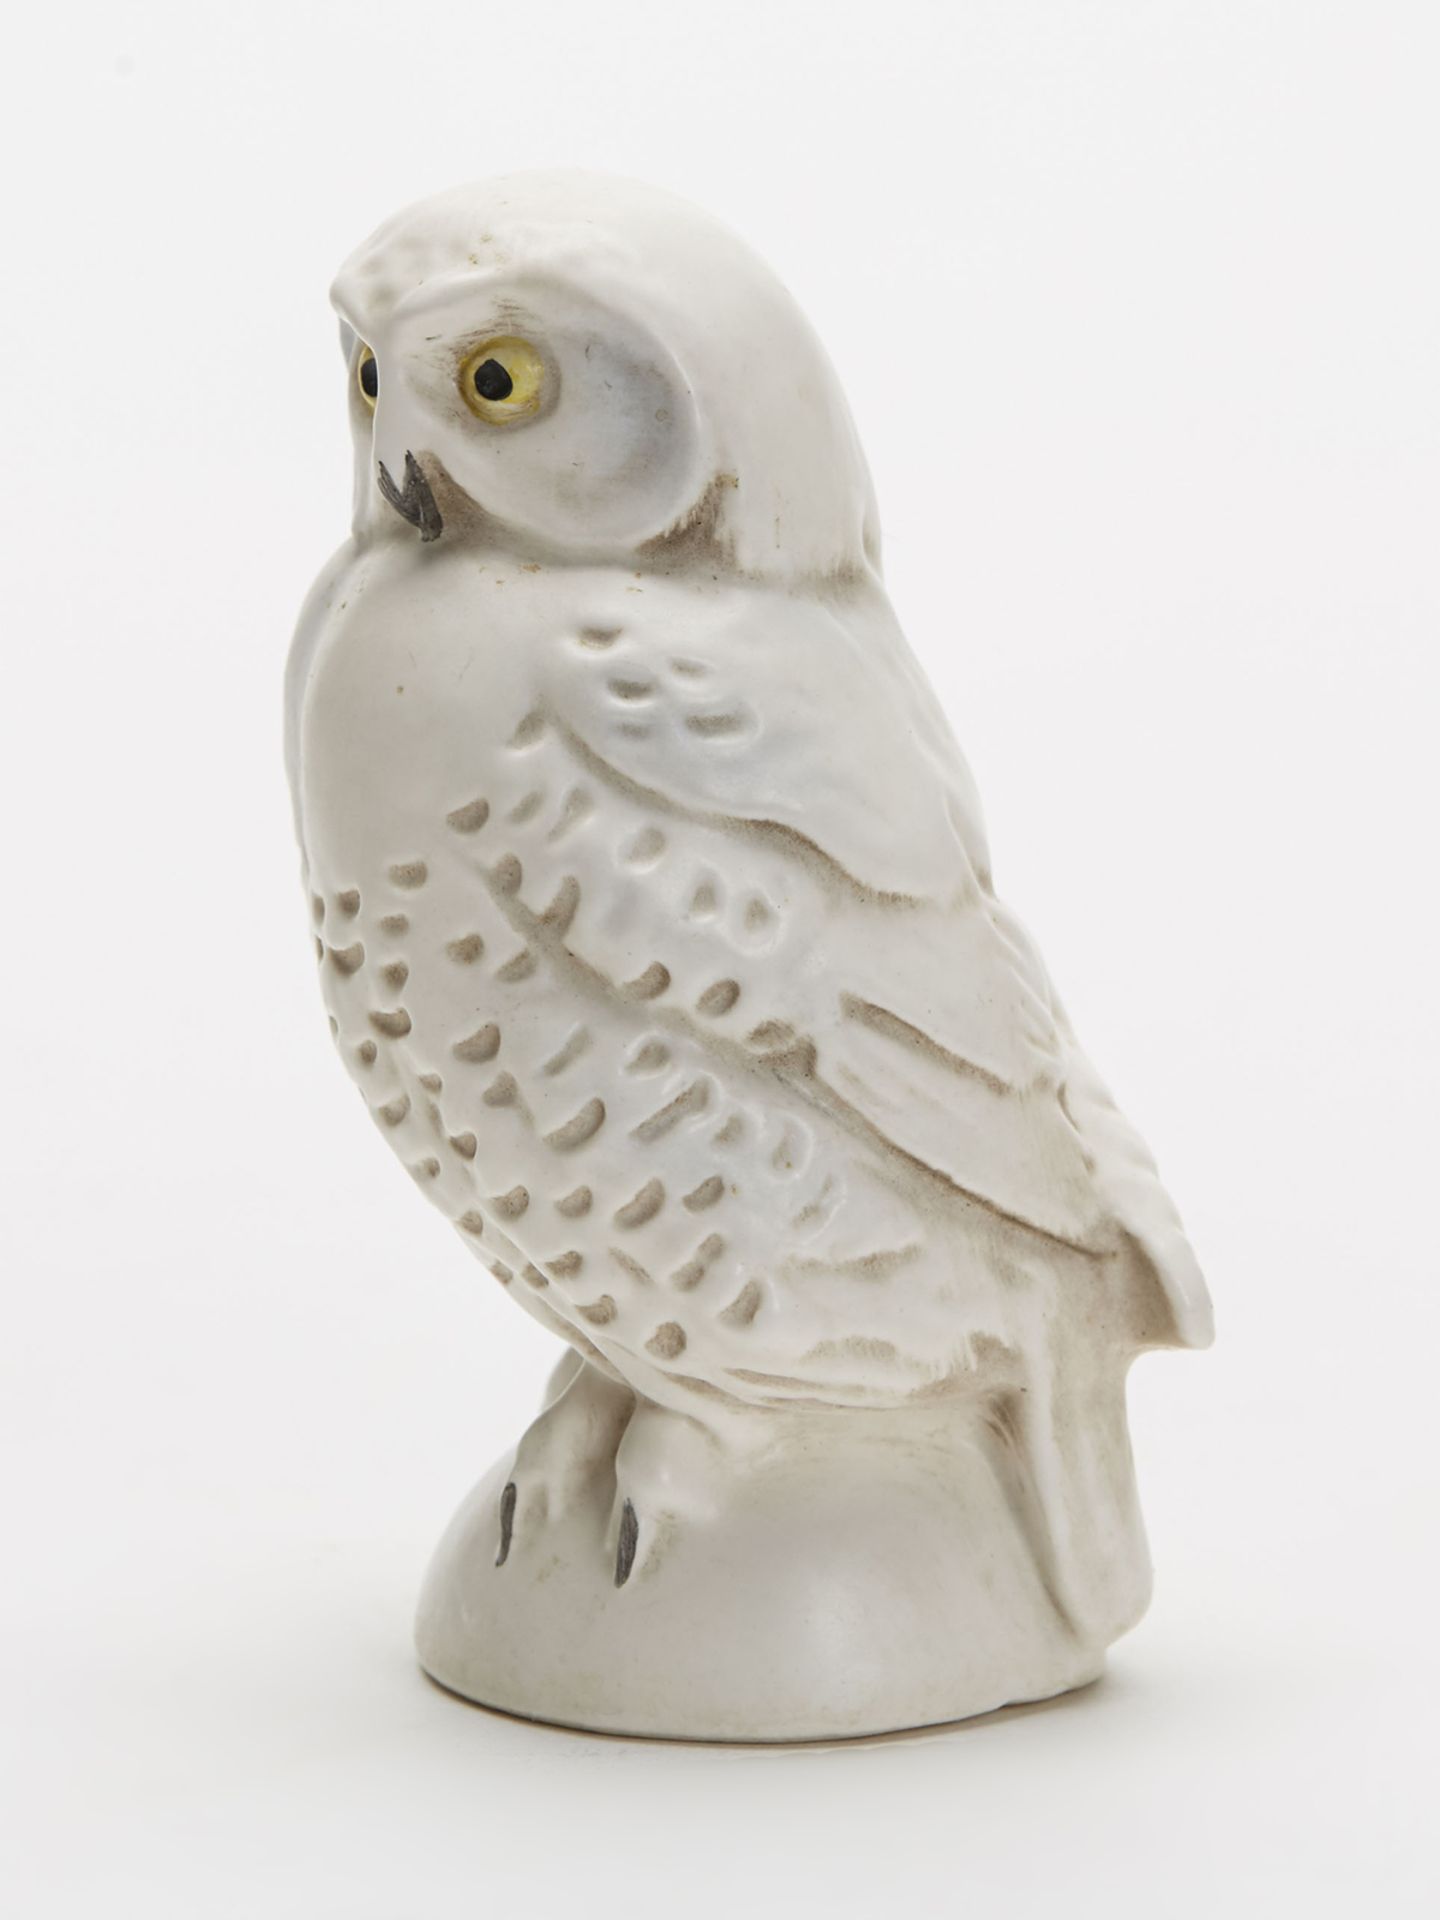 Vintage W Goebel Pottery Figure Of A Snowy Owl 20Th C. - Image 5 of 7